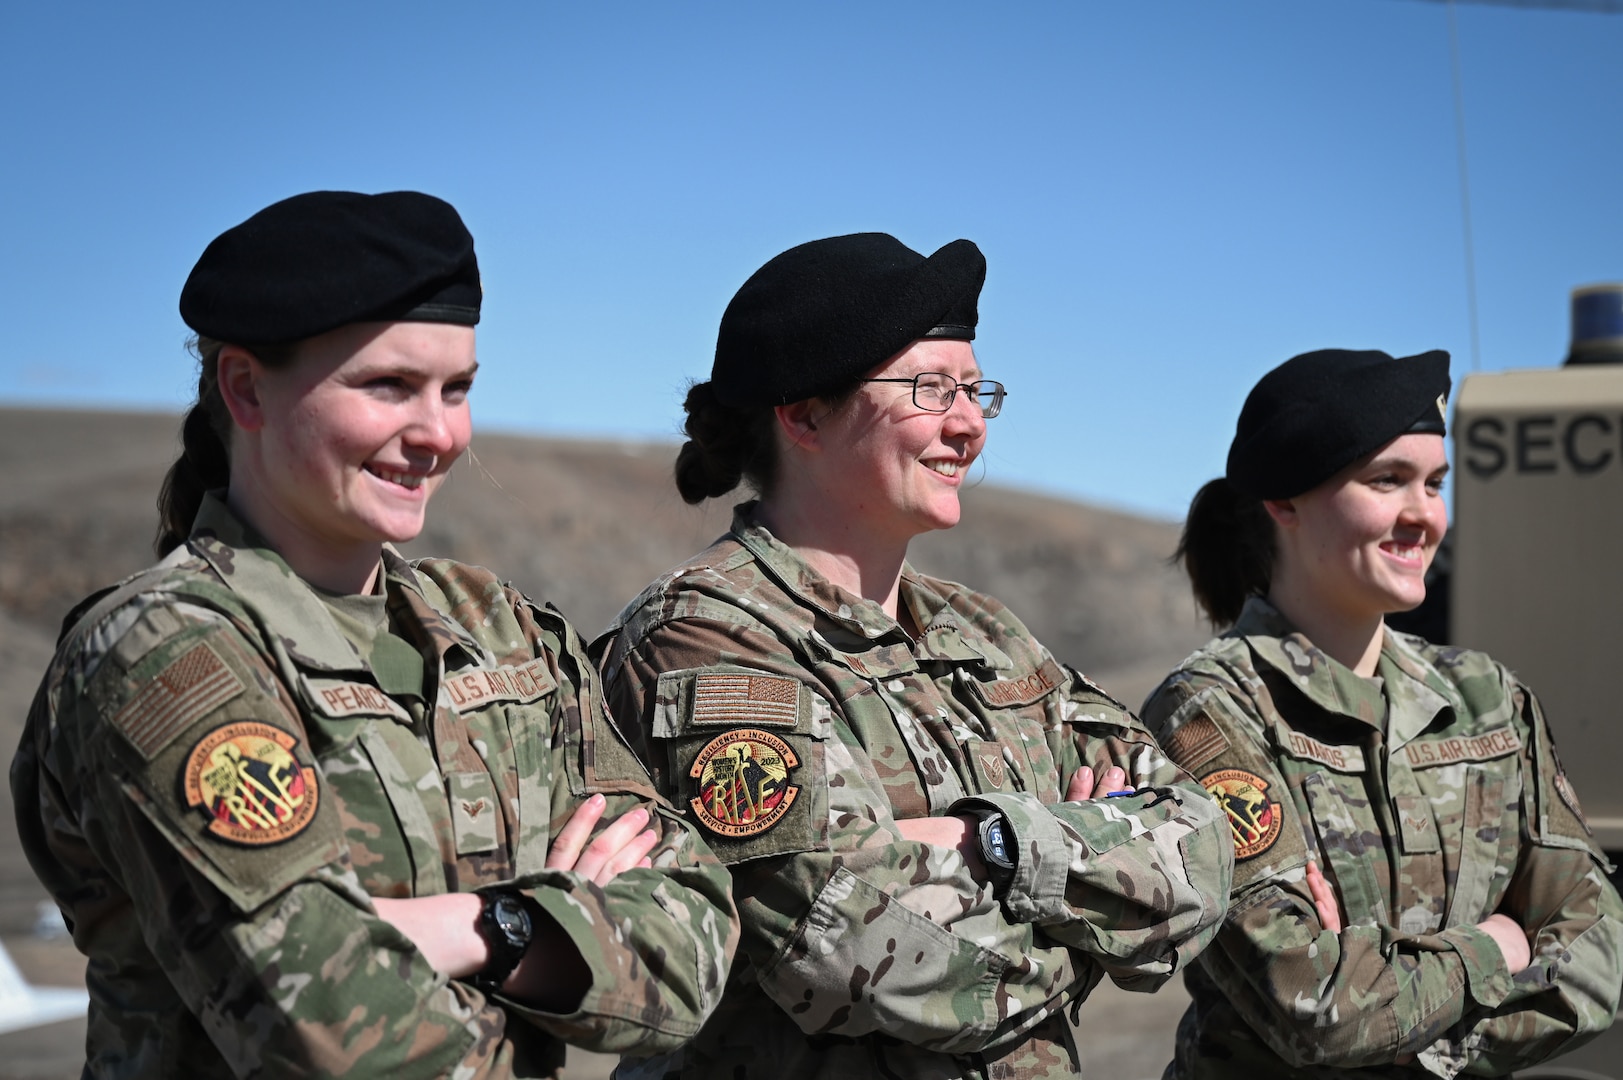 Three women in military uniform and black berets stand for a portrait against blue sky.